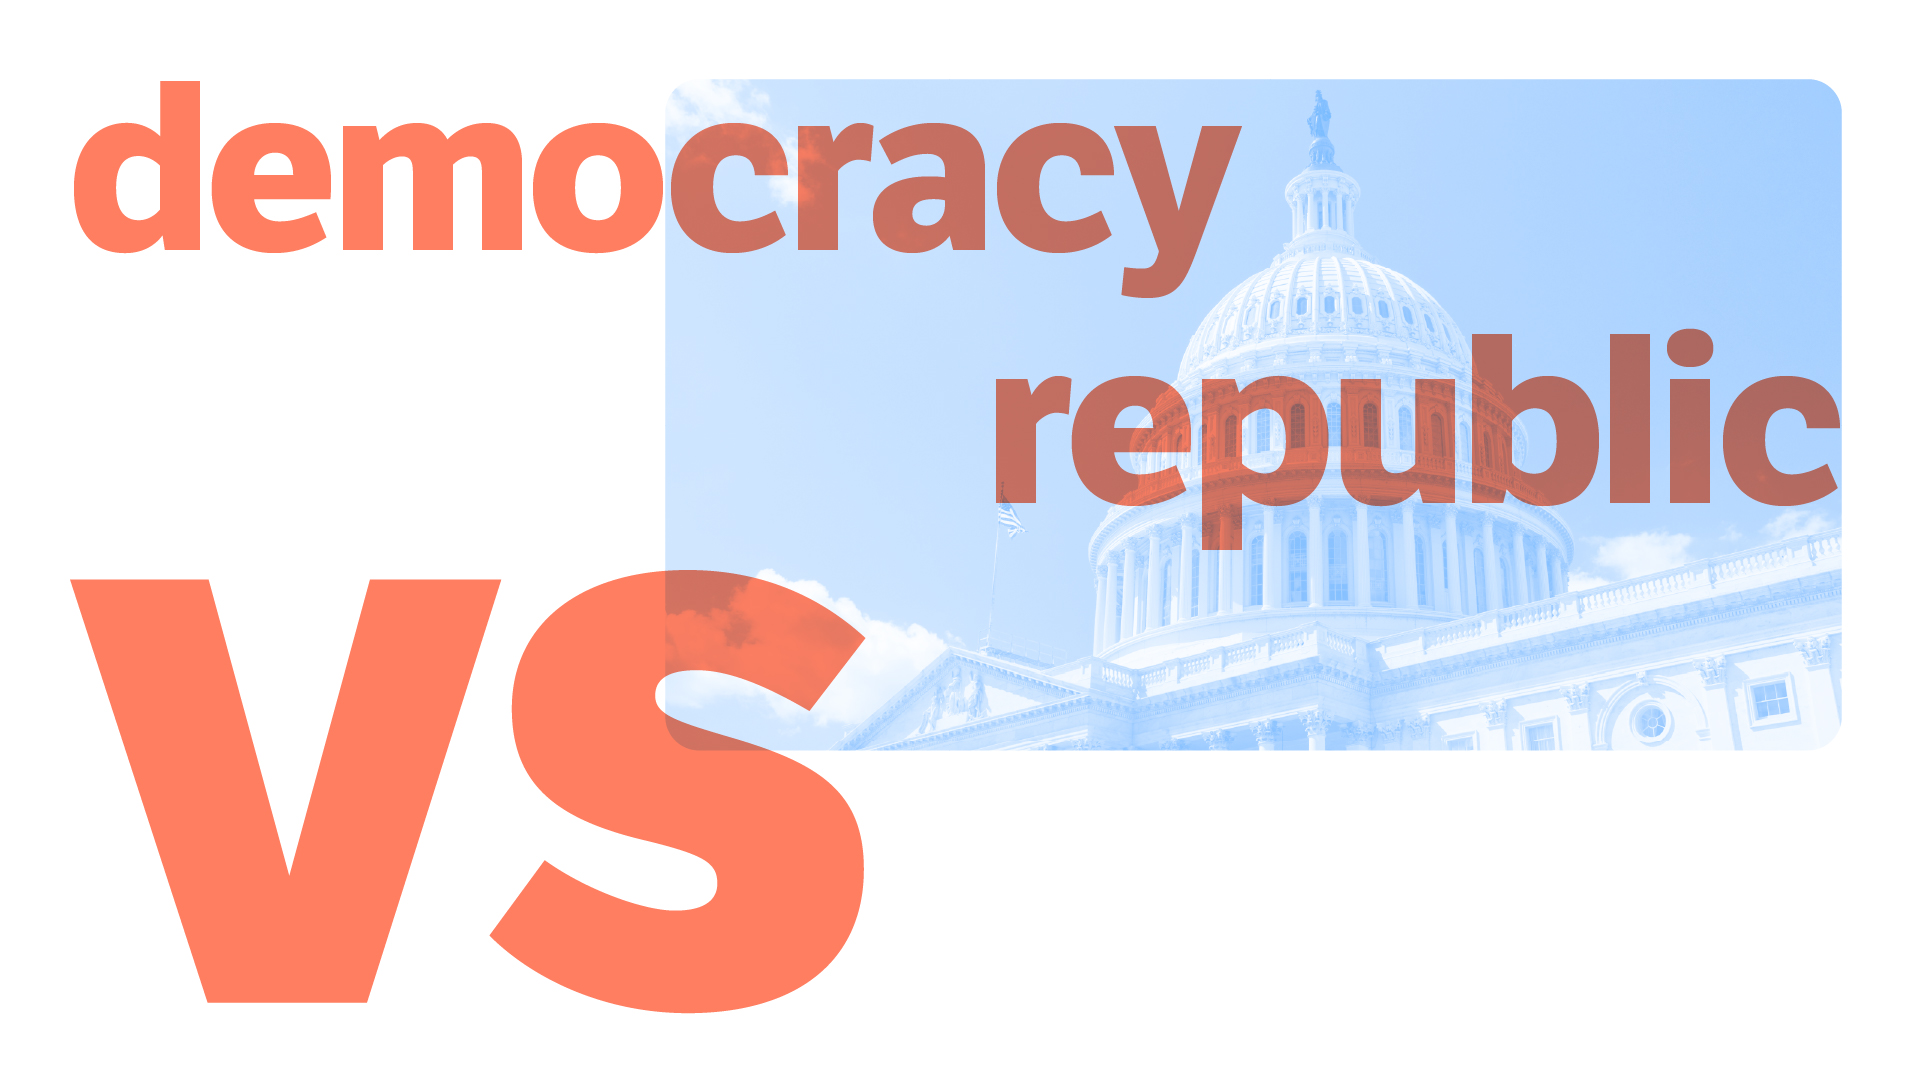 Democracy vs. Republic: Are These The Same or Different?